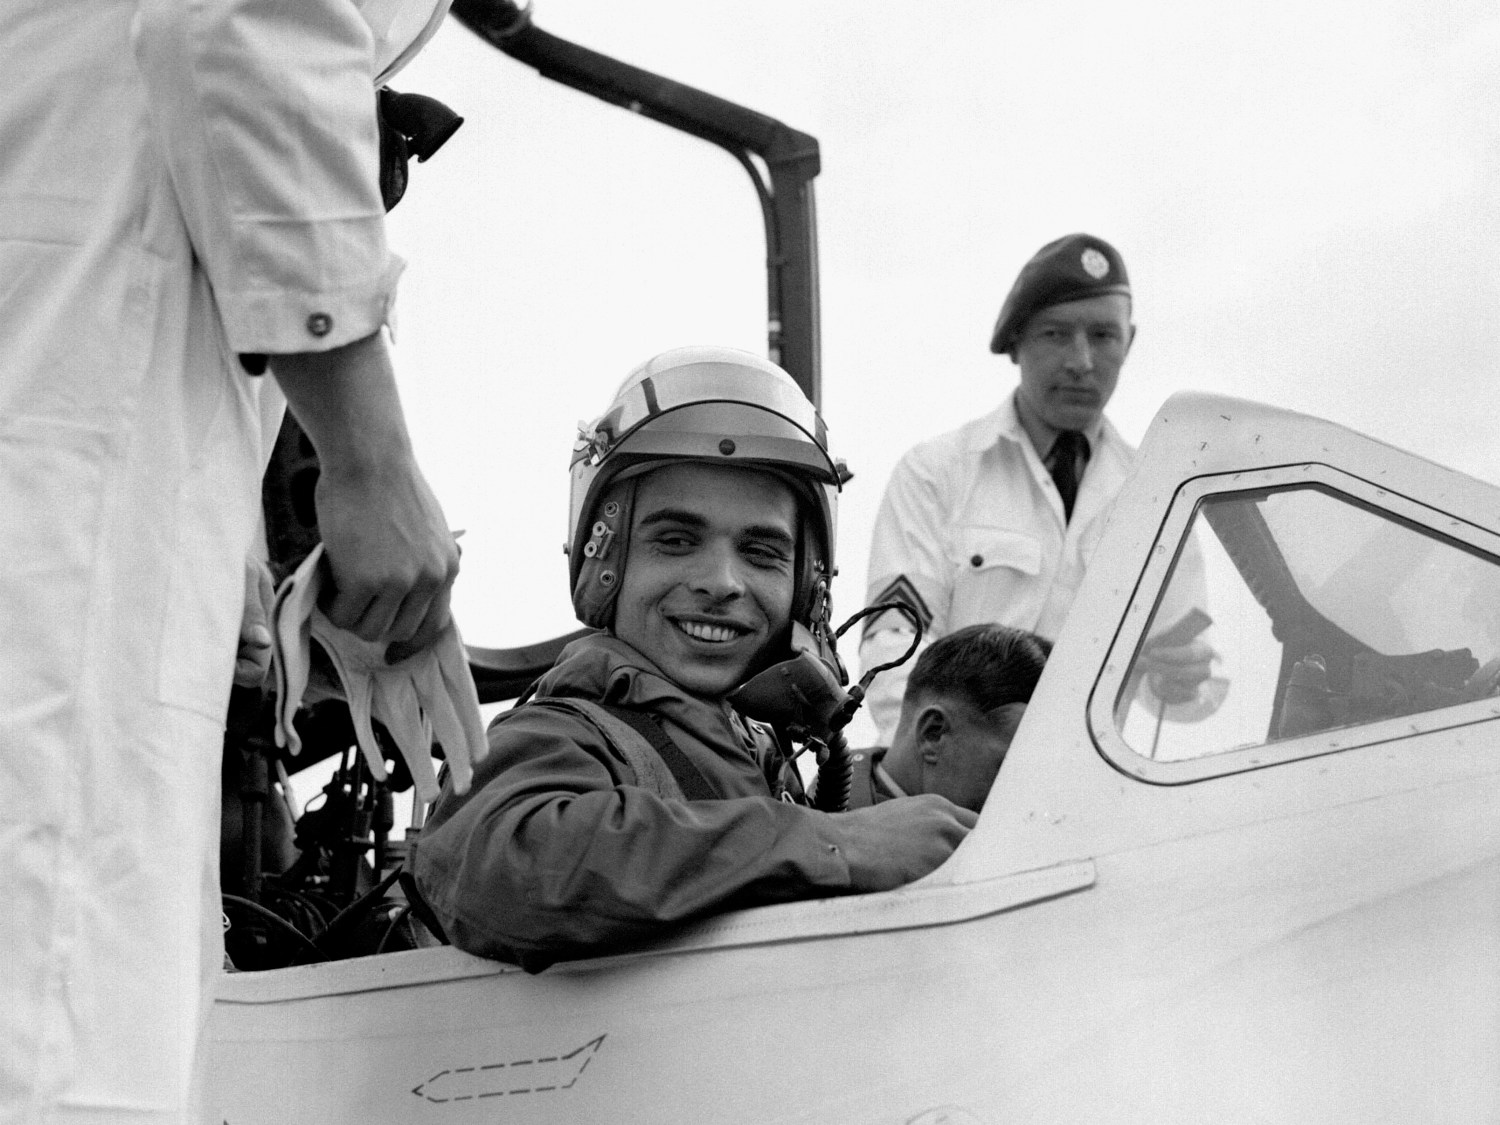 King Hussein of Jordan in the cockpit of a Vampire T.11 jet trainer preparing to take a flight during his visit to RAF Biggin Hill in Kent as part of his official visit to Britain.No Use UK. No Use Ireland. No Use Belgium. No Use France. No Use Germany. No Use Japan. No Use China. No Use Norway. No Use Sweden. No Use Denmark. No Use Holland